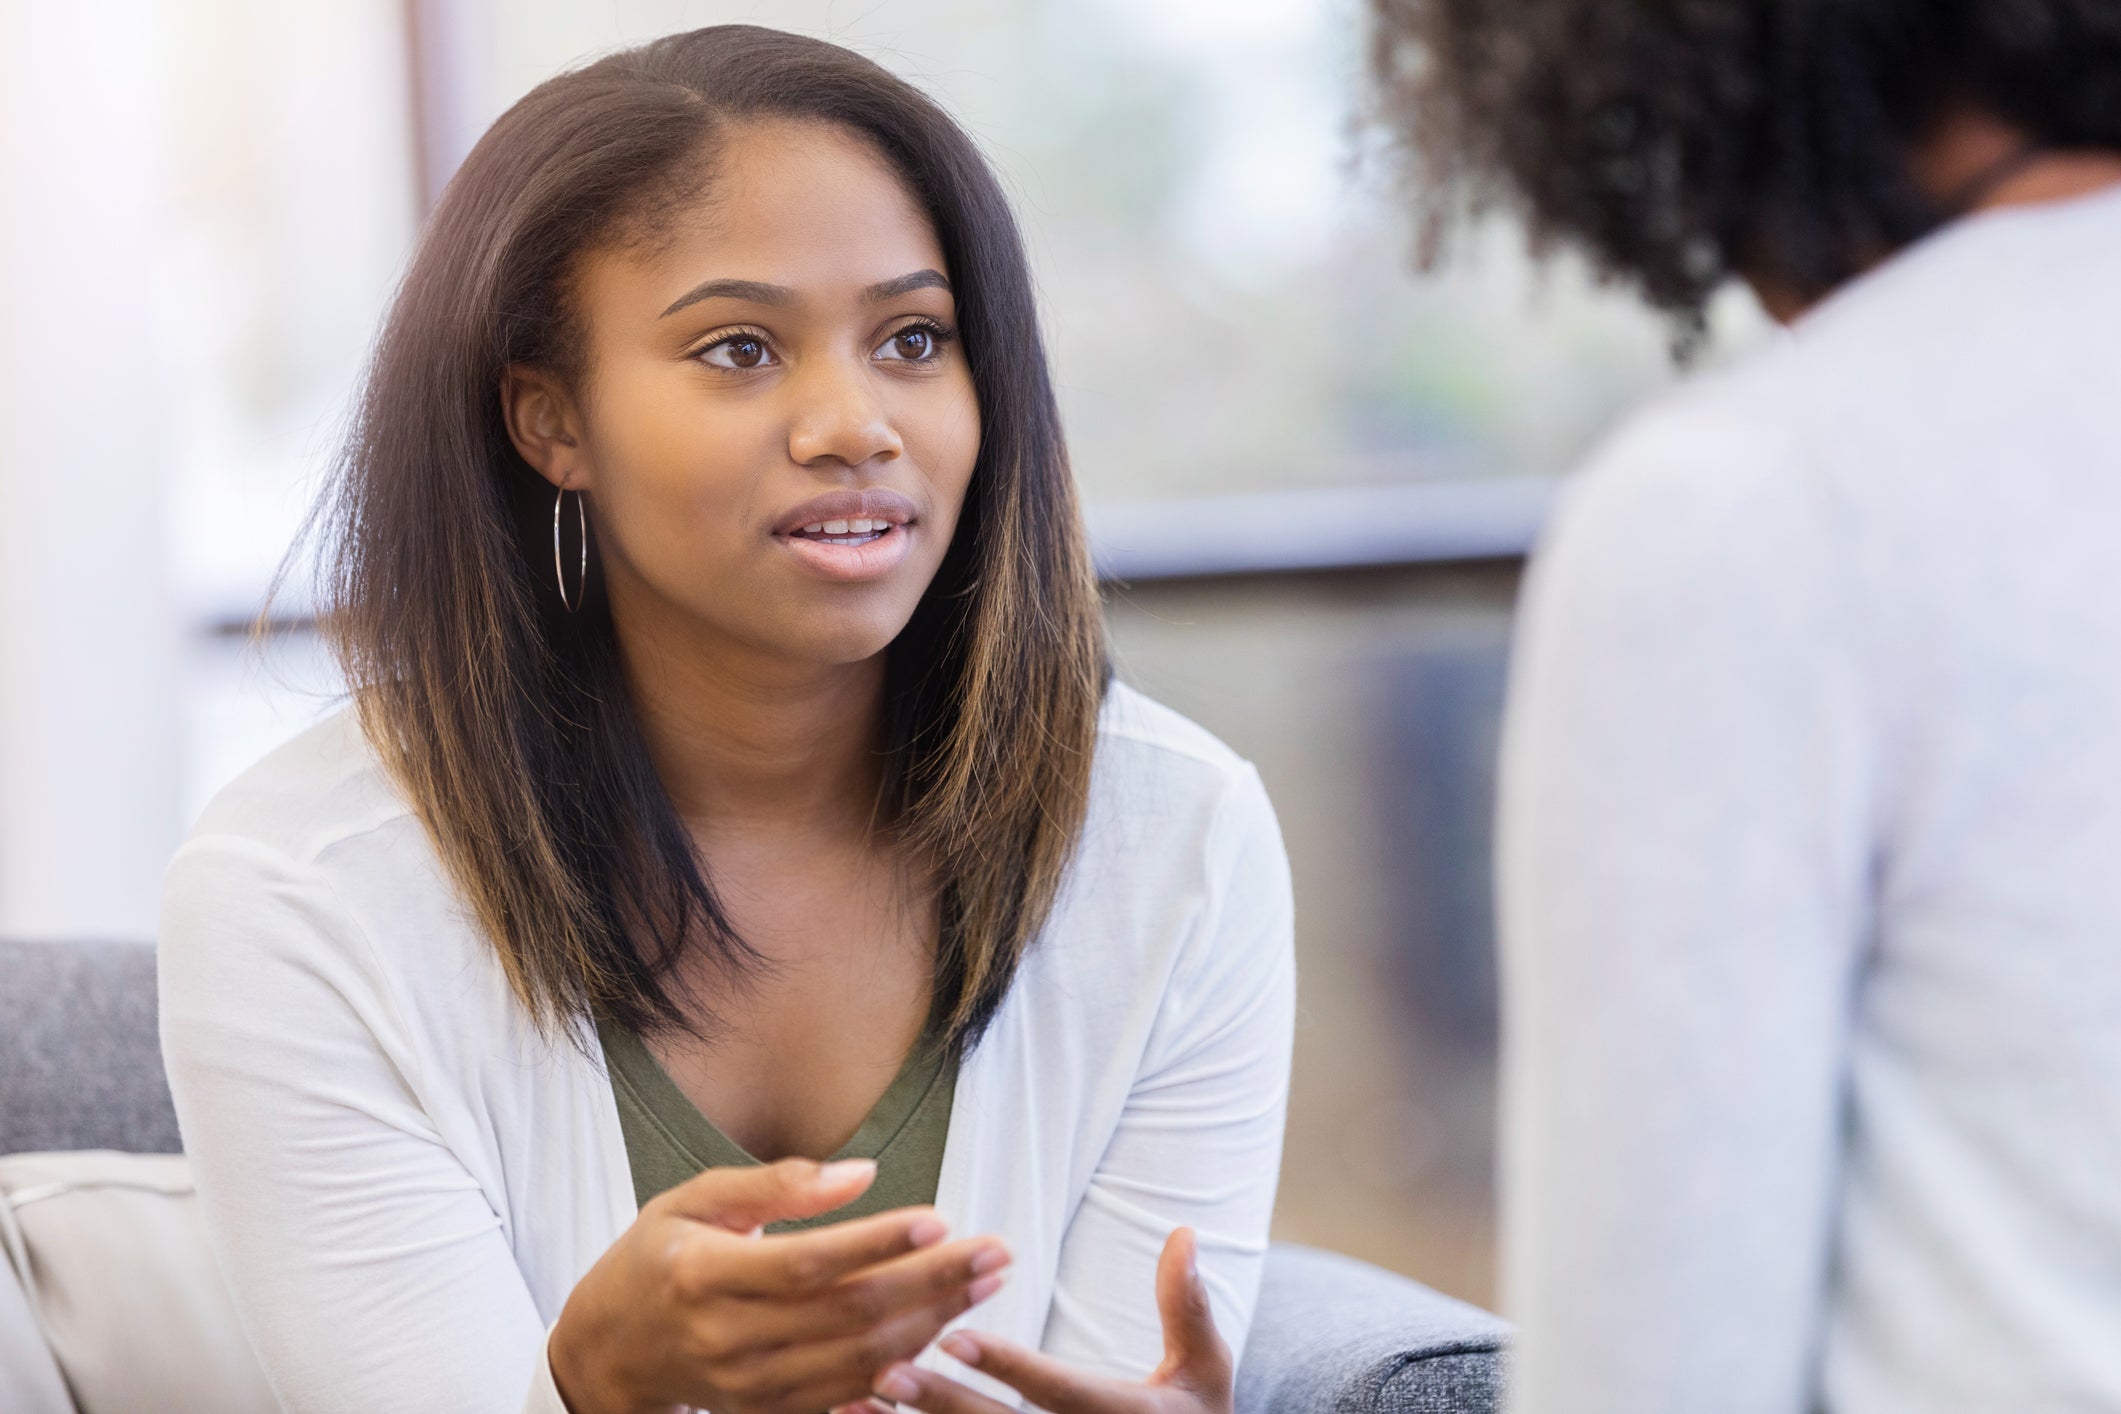 "Listen To What Their World Looks Like": Ways To Talk To Teens About Their Mental Health